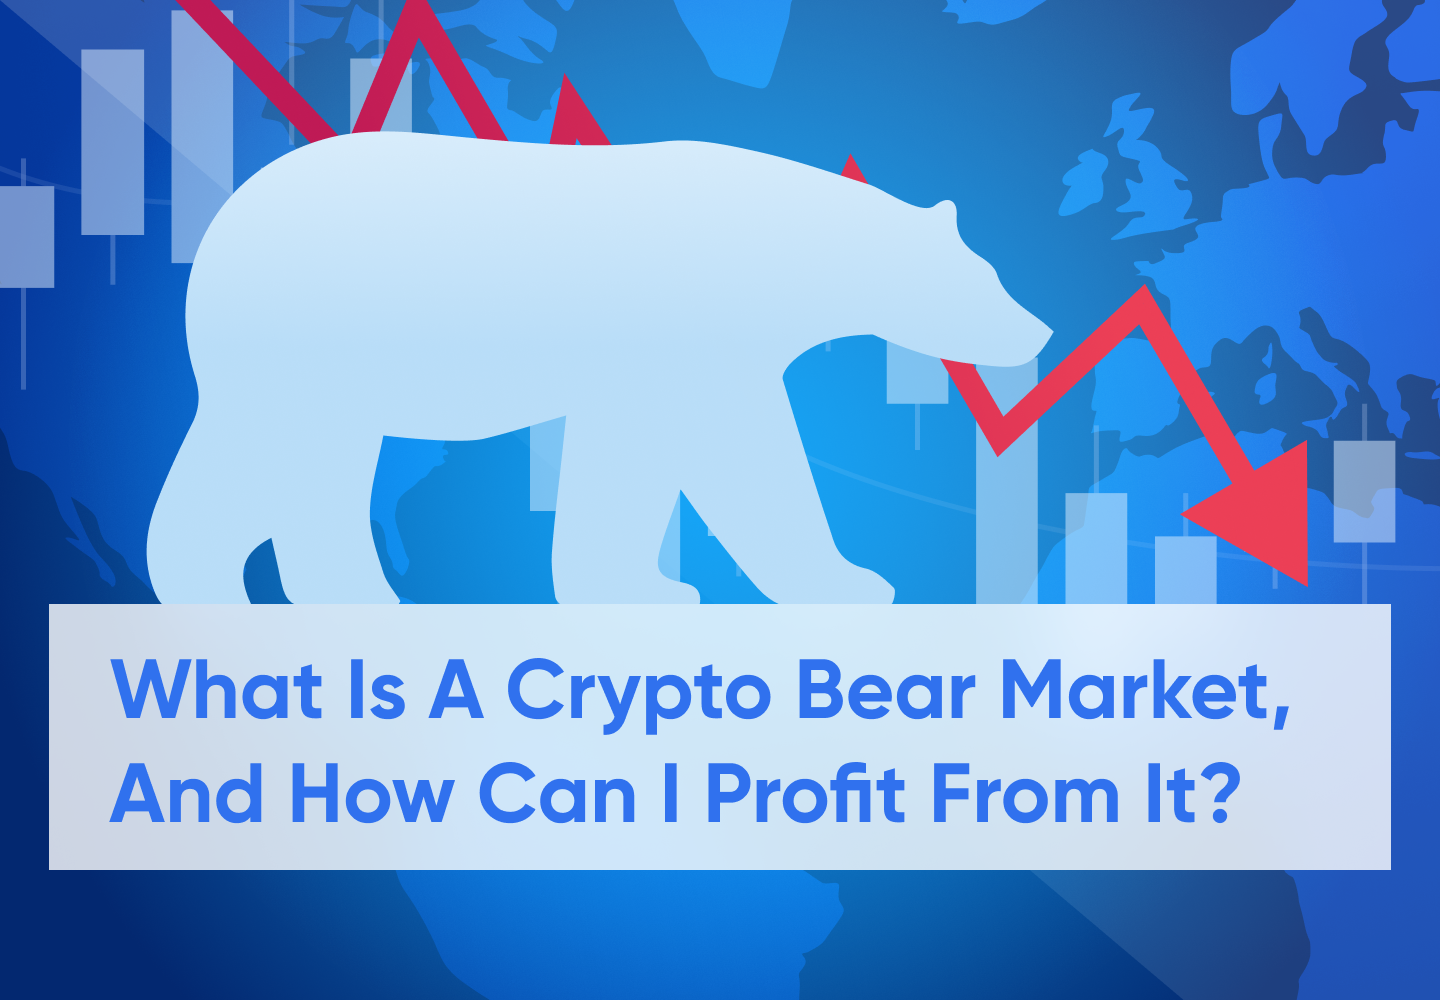 Crypto Bear Market Definition, Cause, And Best Investment Strategies